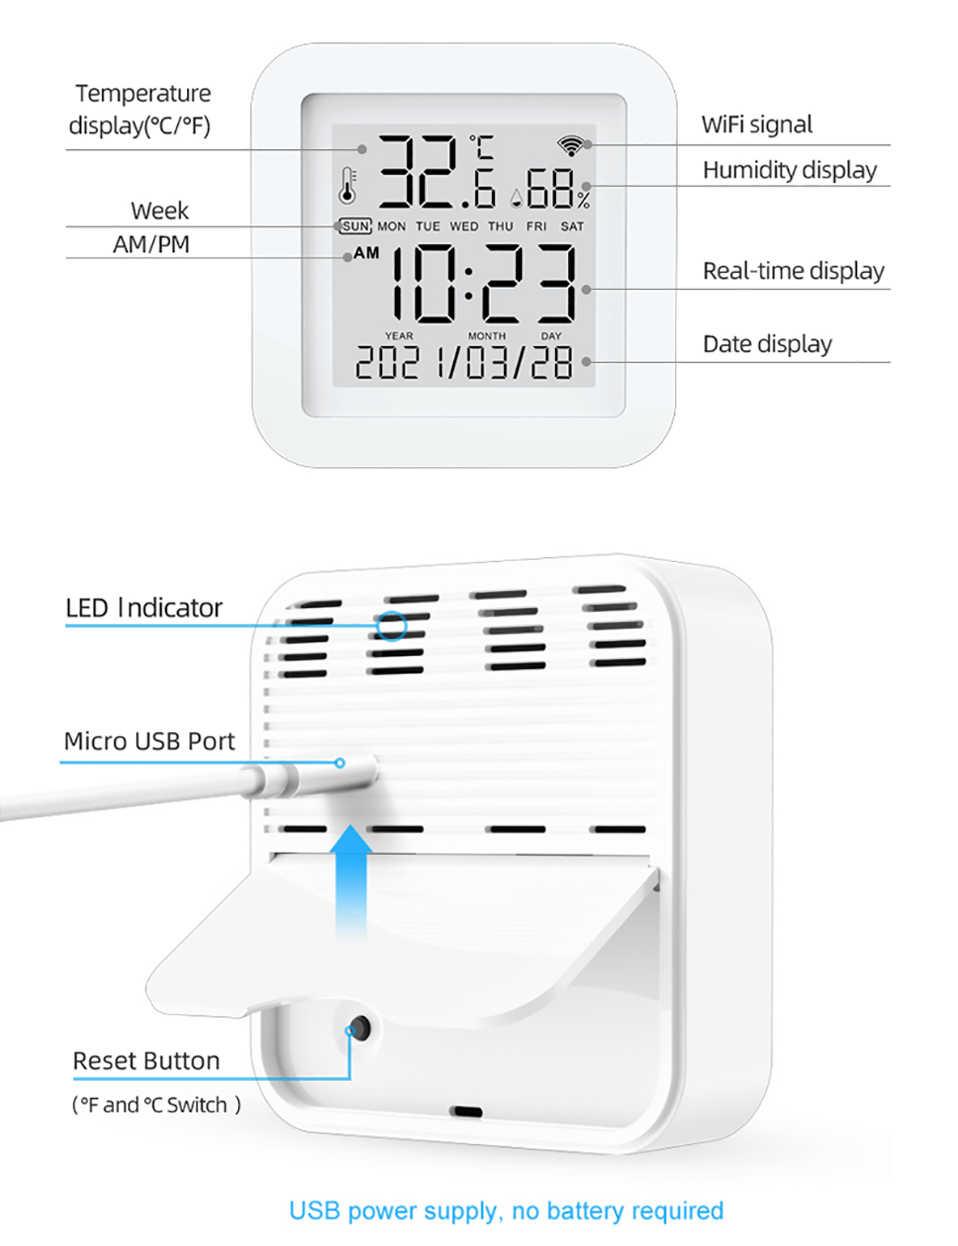 https://virtualmaqazin.com/image/catalog/products/home-and-garden/Tuya%20WiFi%20Temperature%202/description/Tuya%20WiFi%20Temperature%20and%20Humidity%20Sensor%20Home%20Assistant%20for%20Sma%20(6).png